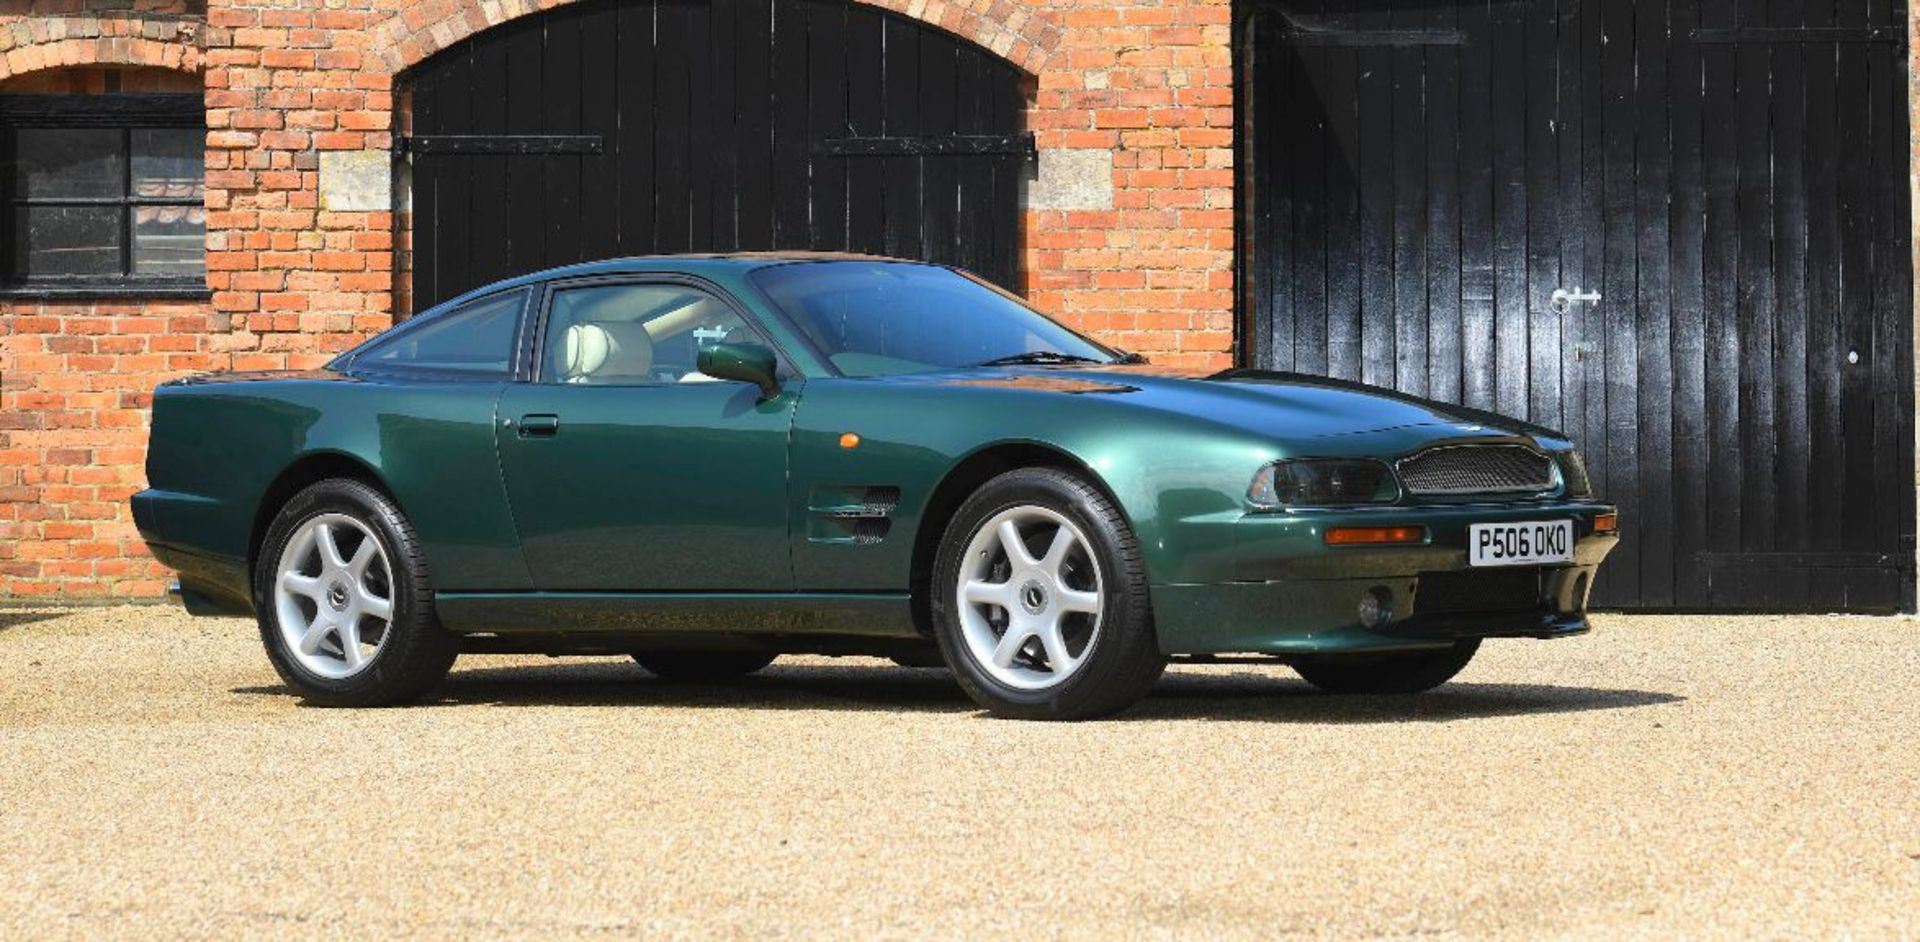 1996 Aston Martin V8 Coupe - one of only 101 made. - Bild 2 aus 26